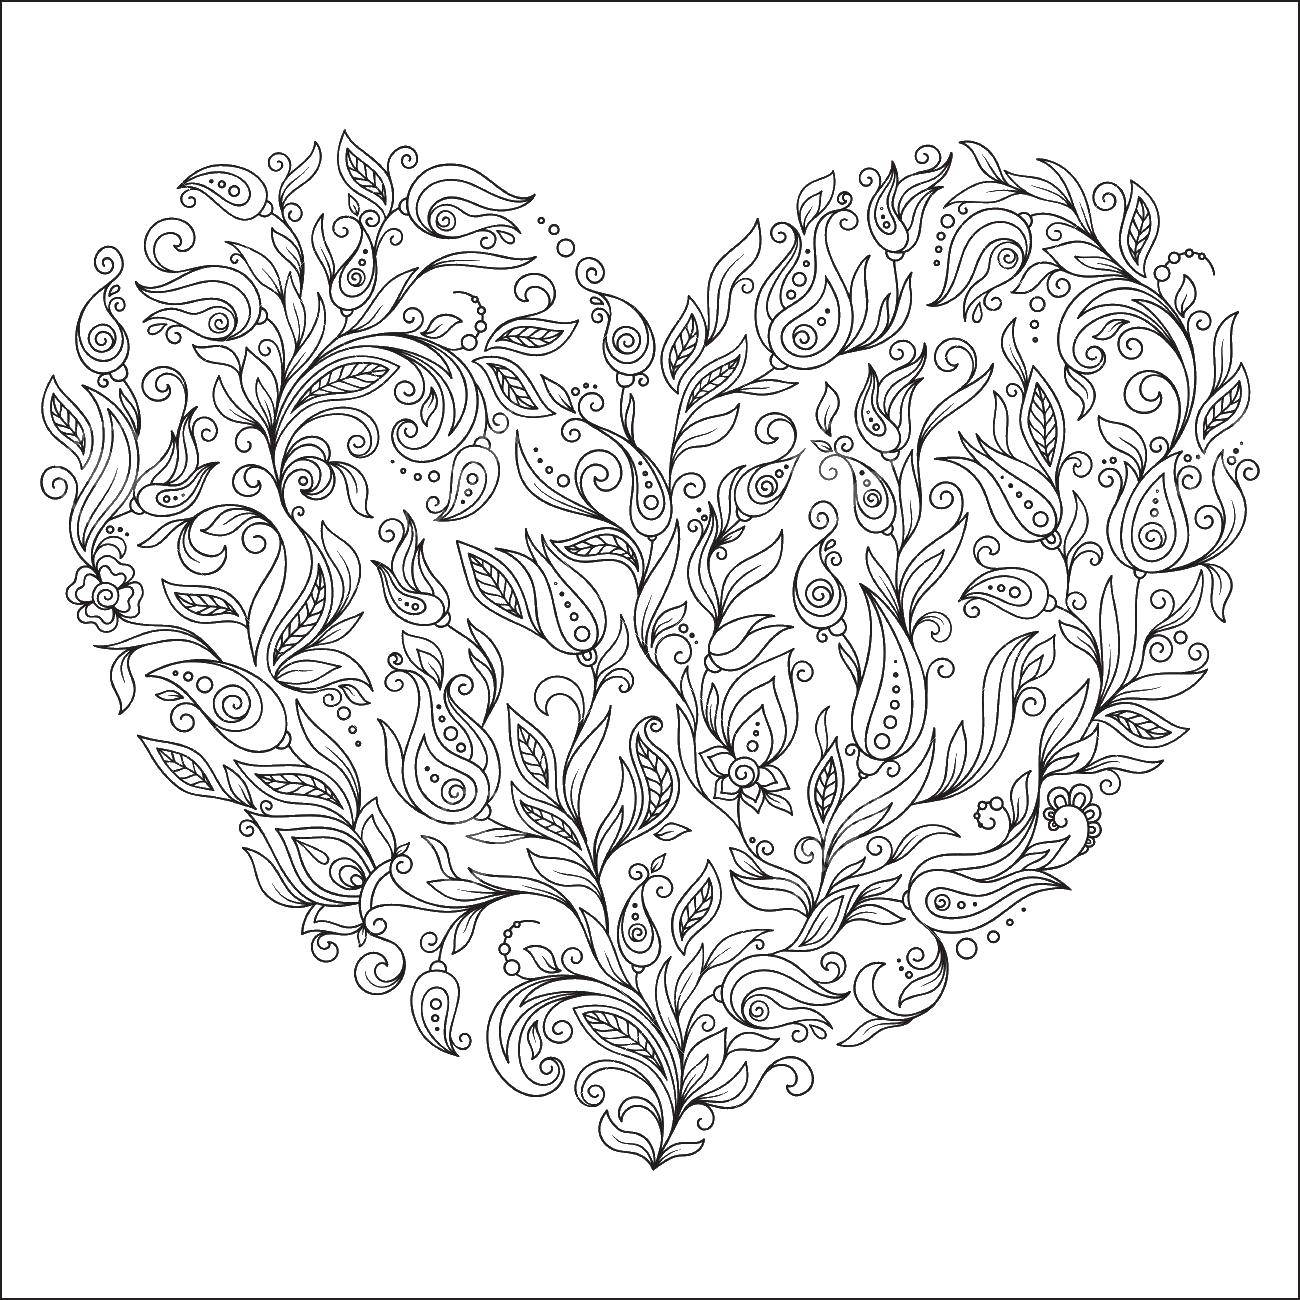 Coloring Heart patterns. Category Valentines day. Tags:  flowers, heart, ornament.